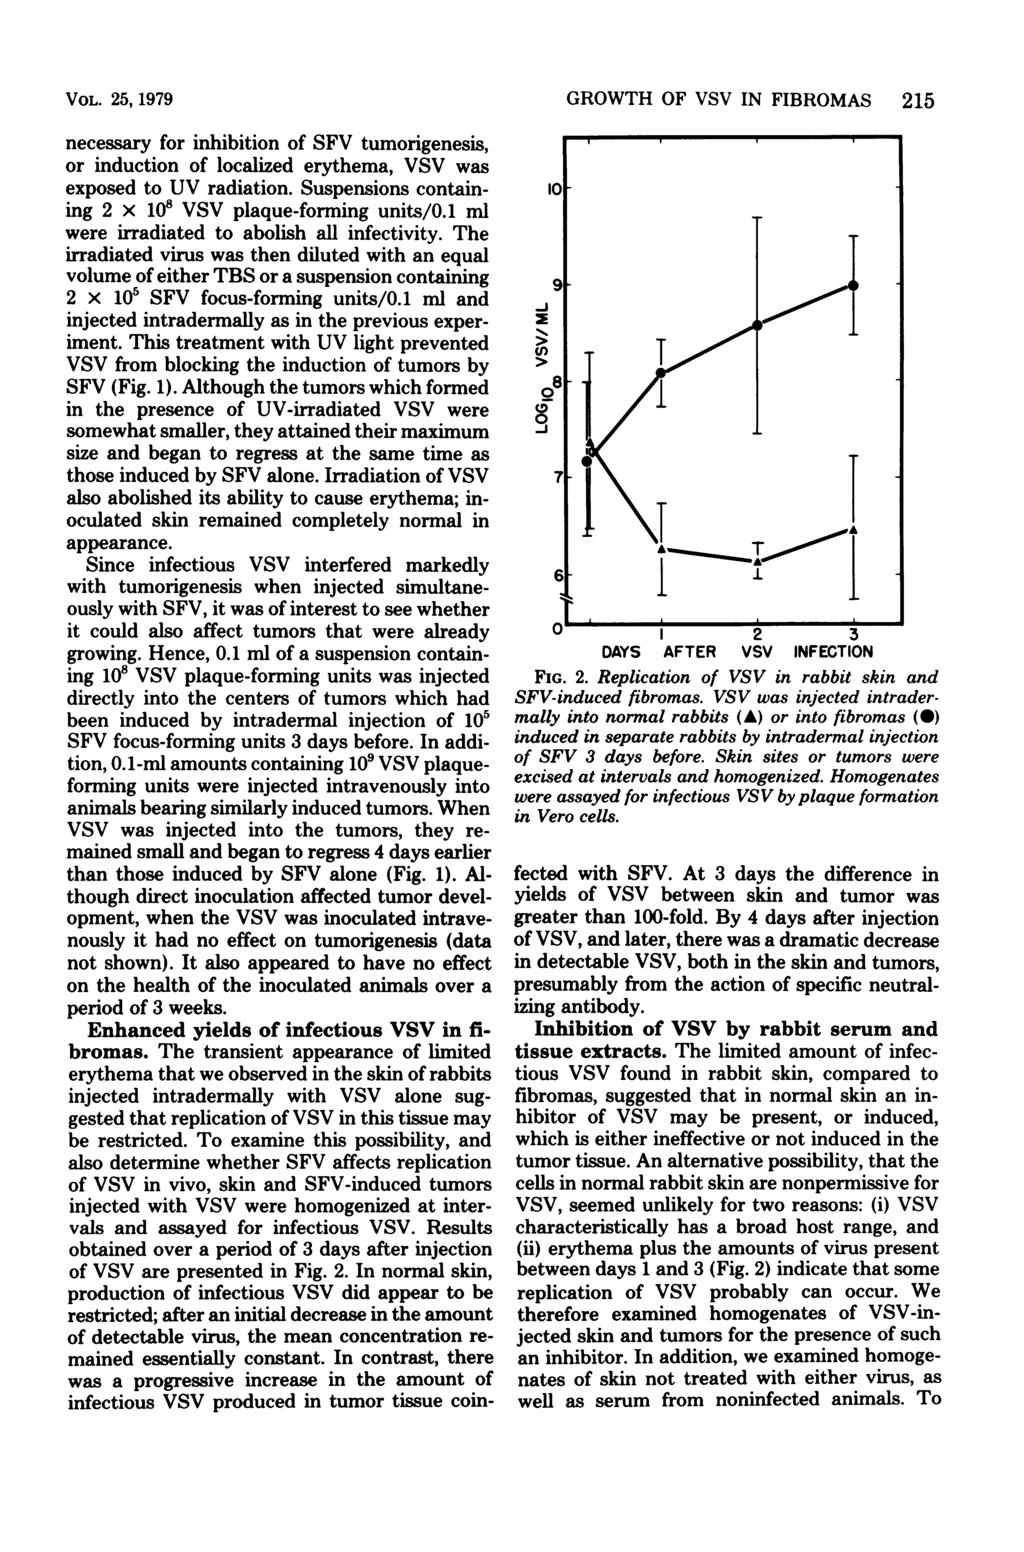 VOL. 25, 1979 necessary for inhibition of SFV tumorigenesis, or induction of localized erythema, VSV was exposed to UV radiation. Suspensions containing 2 x 108 VSV plaque-forming units/0.